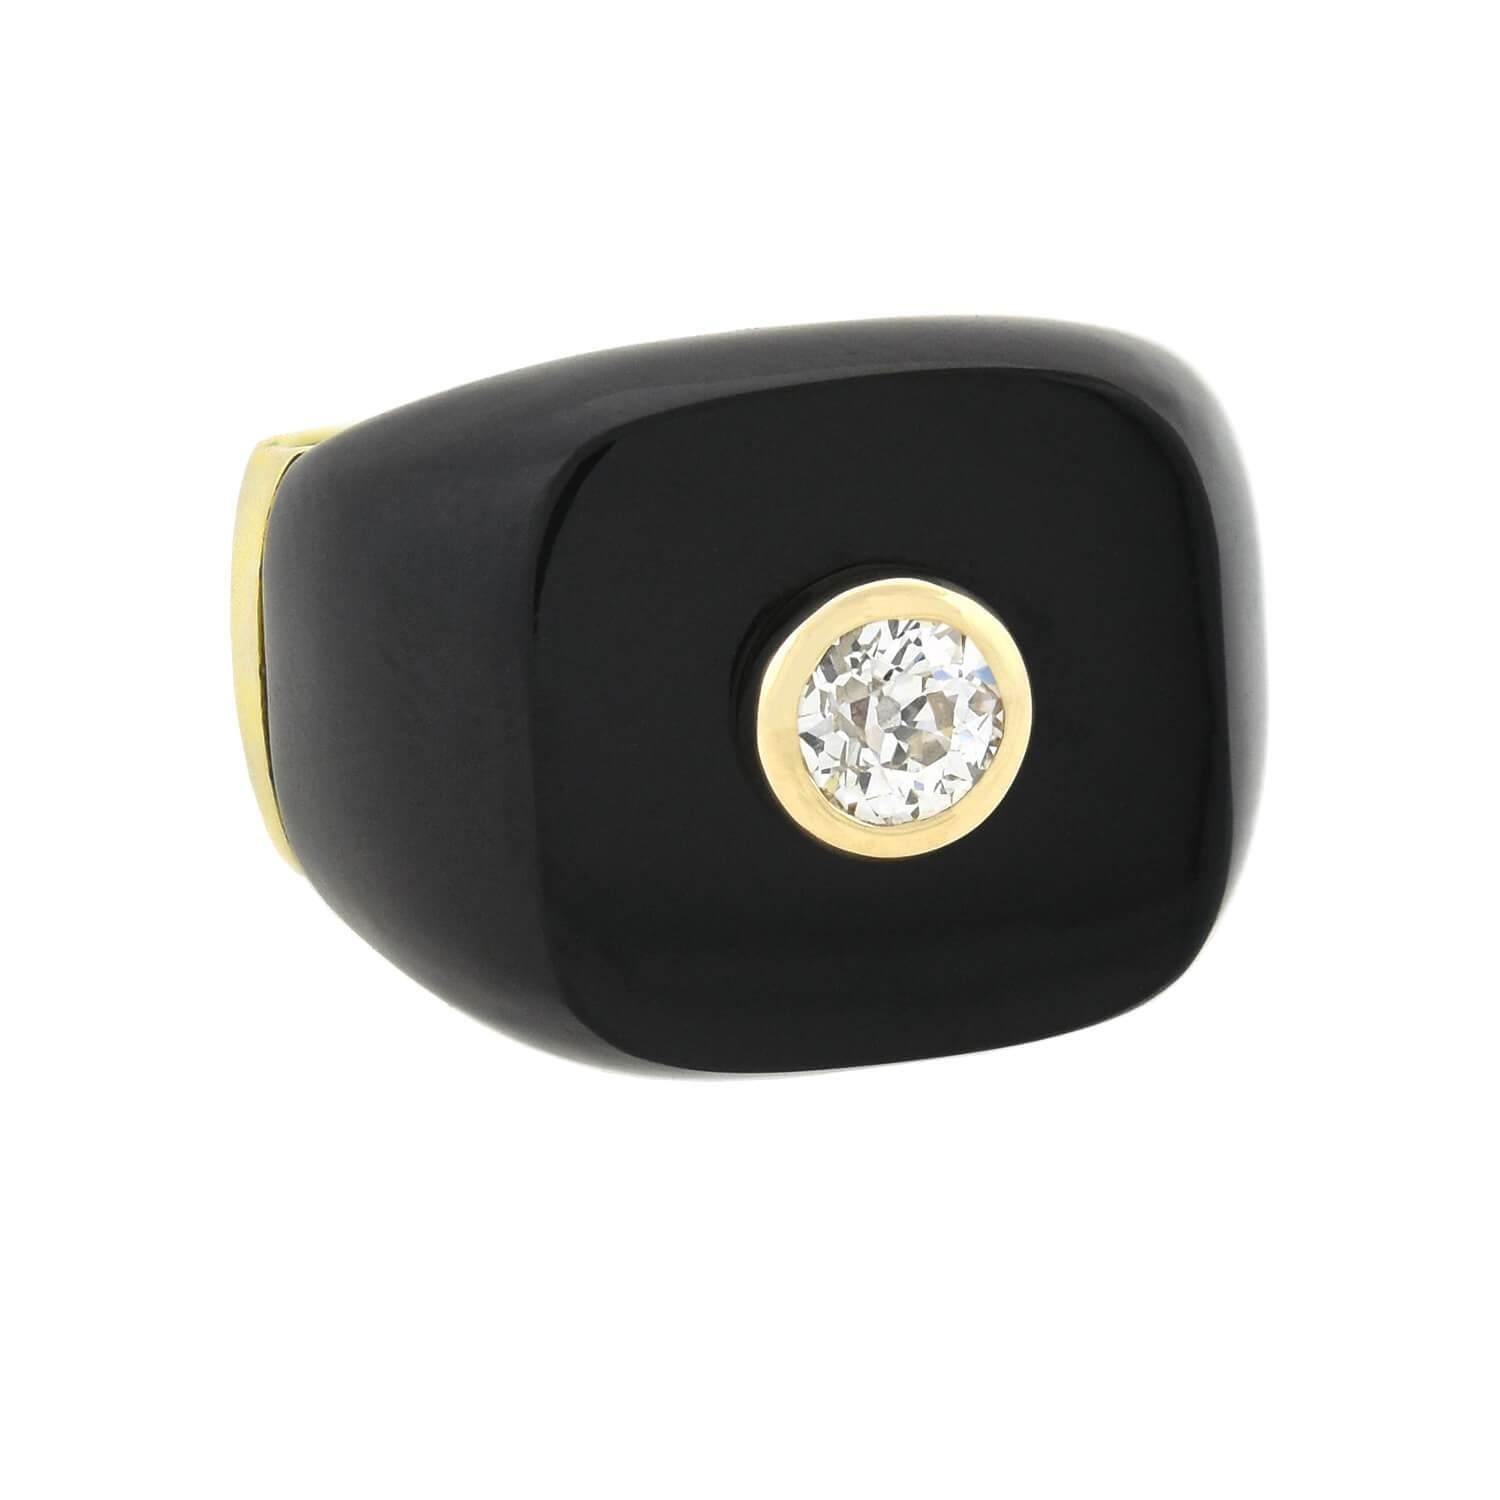 A bold and unusual onyx ring from the Art Deco (ca1920s) era! This stylish ring is crafted in vibrant 14kt yellow gold and is particularly substantial in both size and appearance. The ring has a square-shaped onyx face, which is flat on the surface